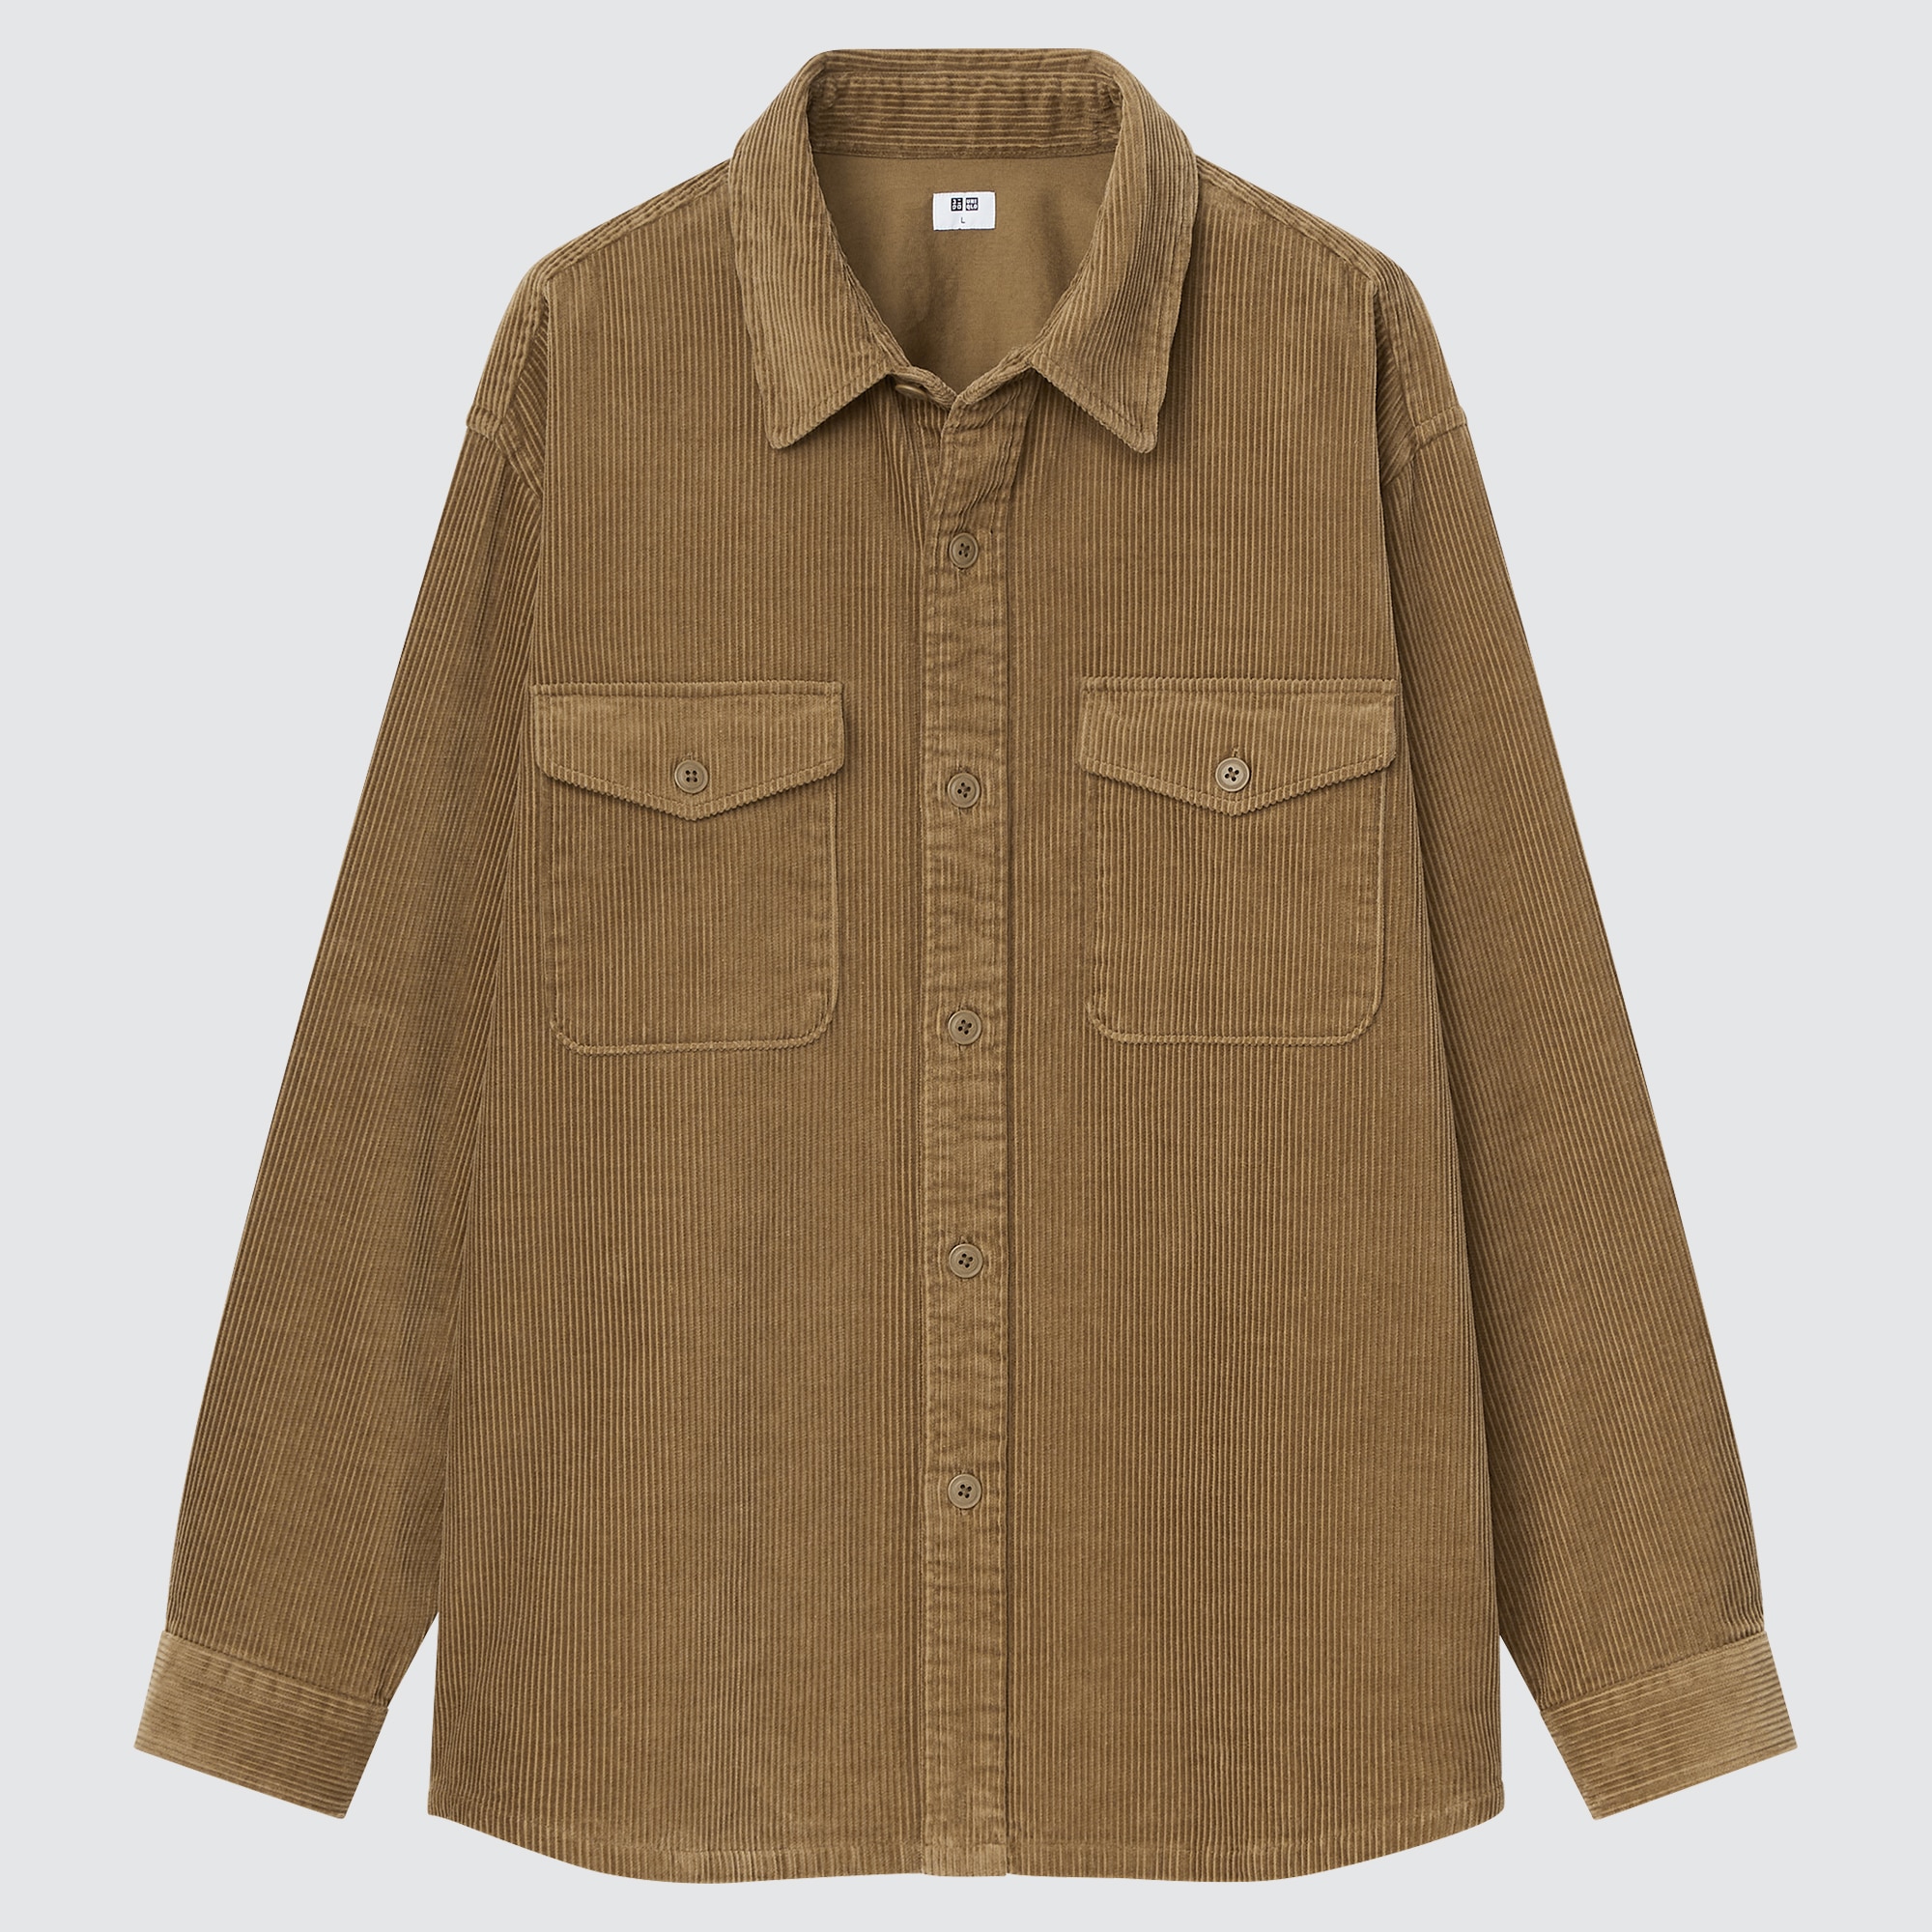 UNIQLO Corduroy Work Shirt  Where To Buy  450266COL57  The Sole Supplier